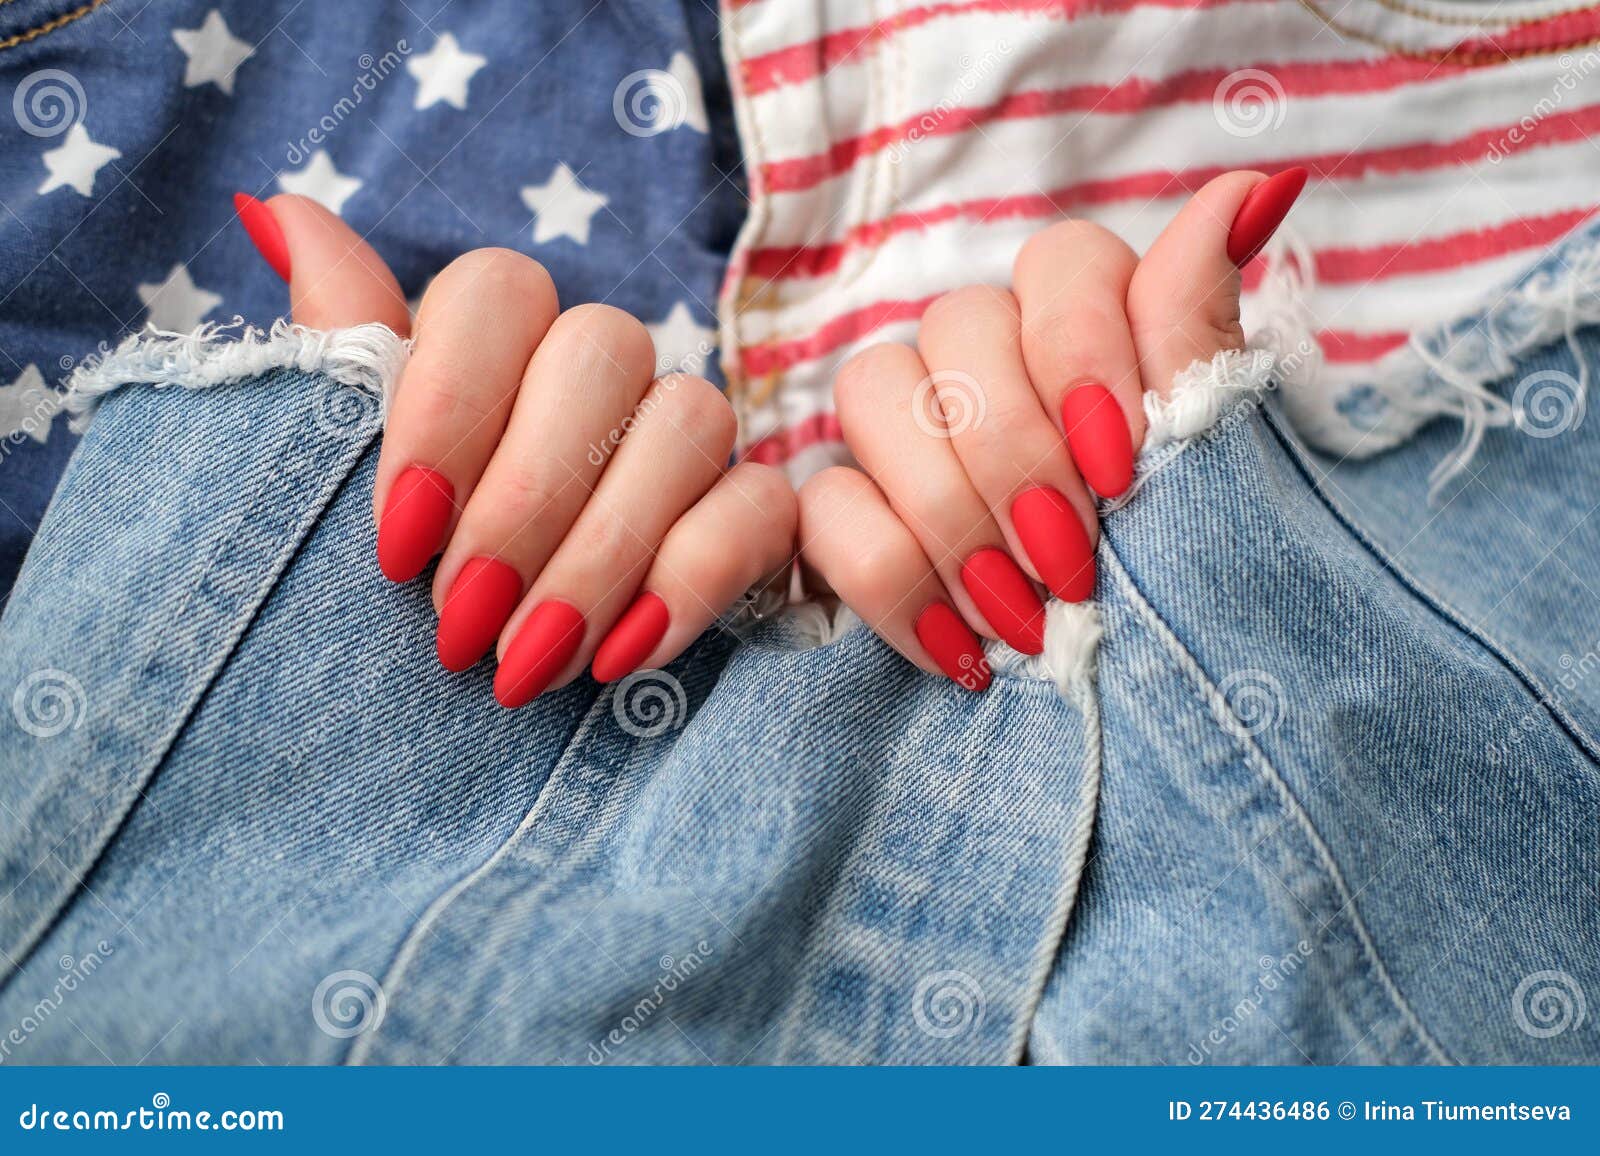 What's the Difference Between a French vs American Mani?